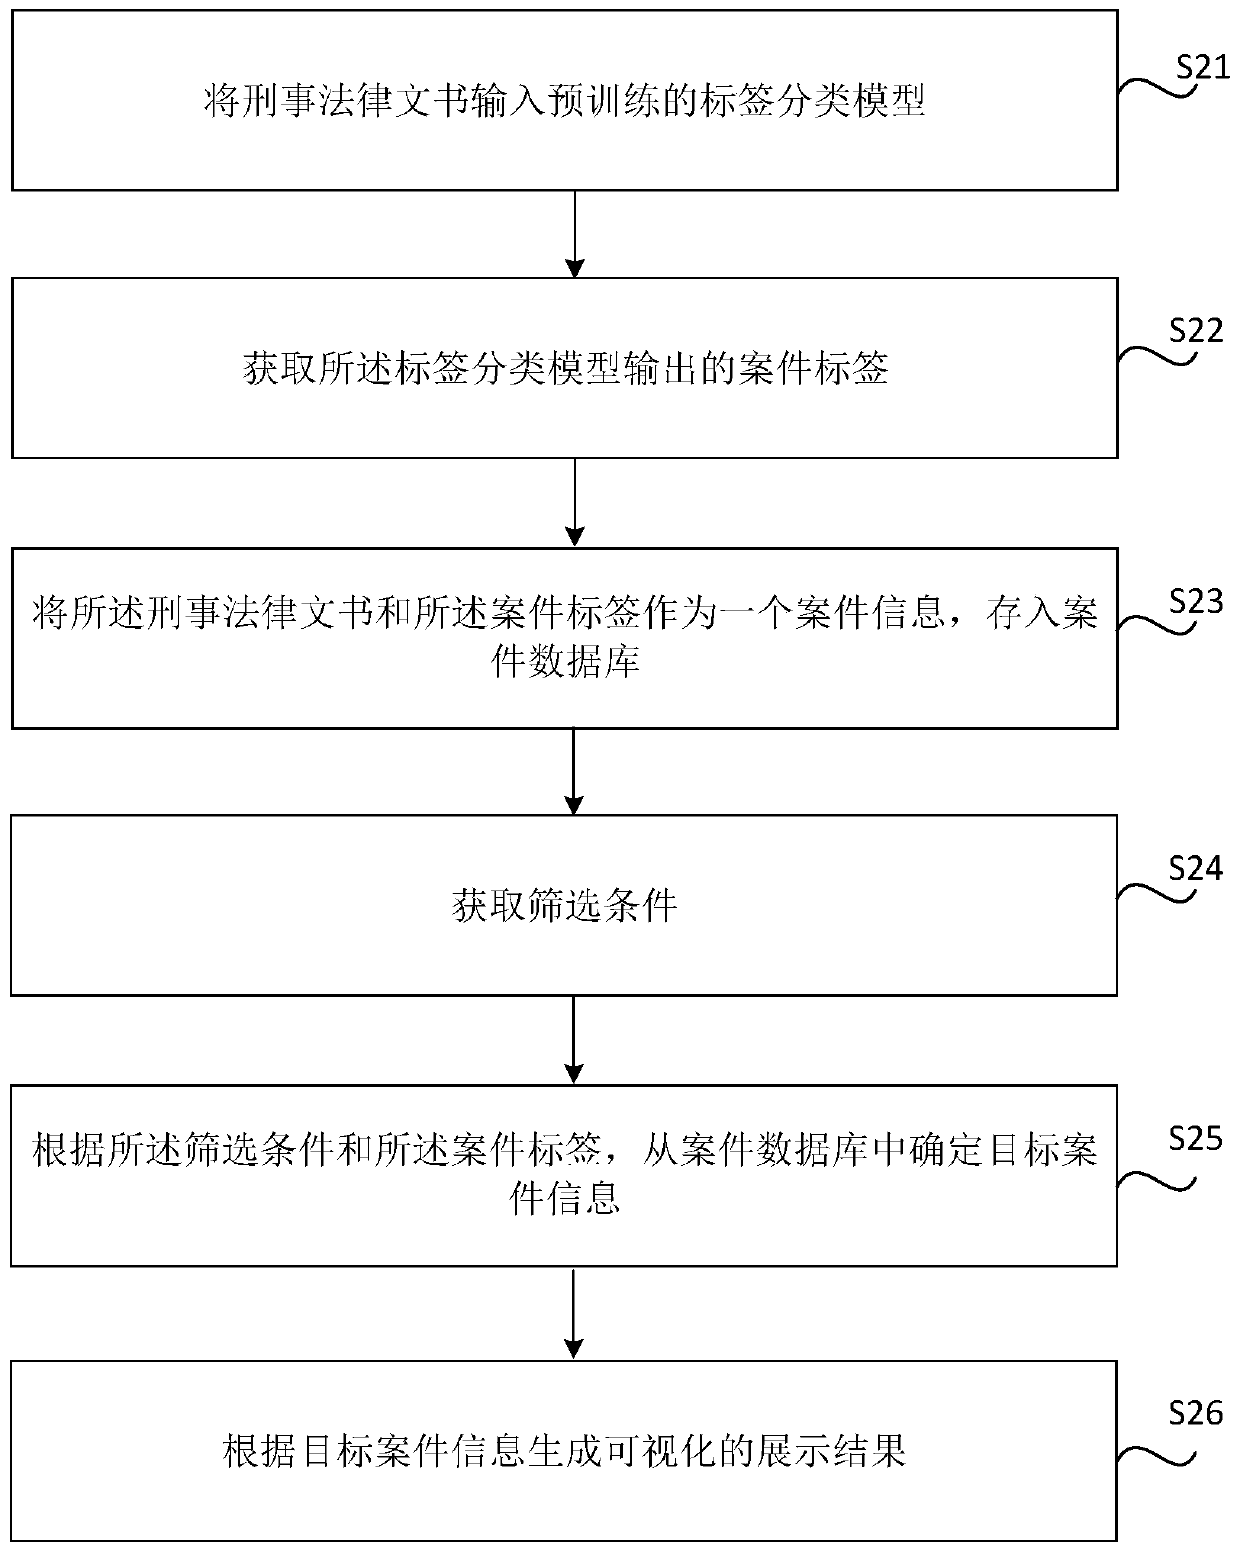 Criminal legal document processing method and device, storage medium and electronic equipment